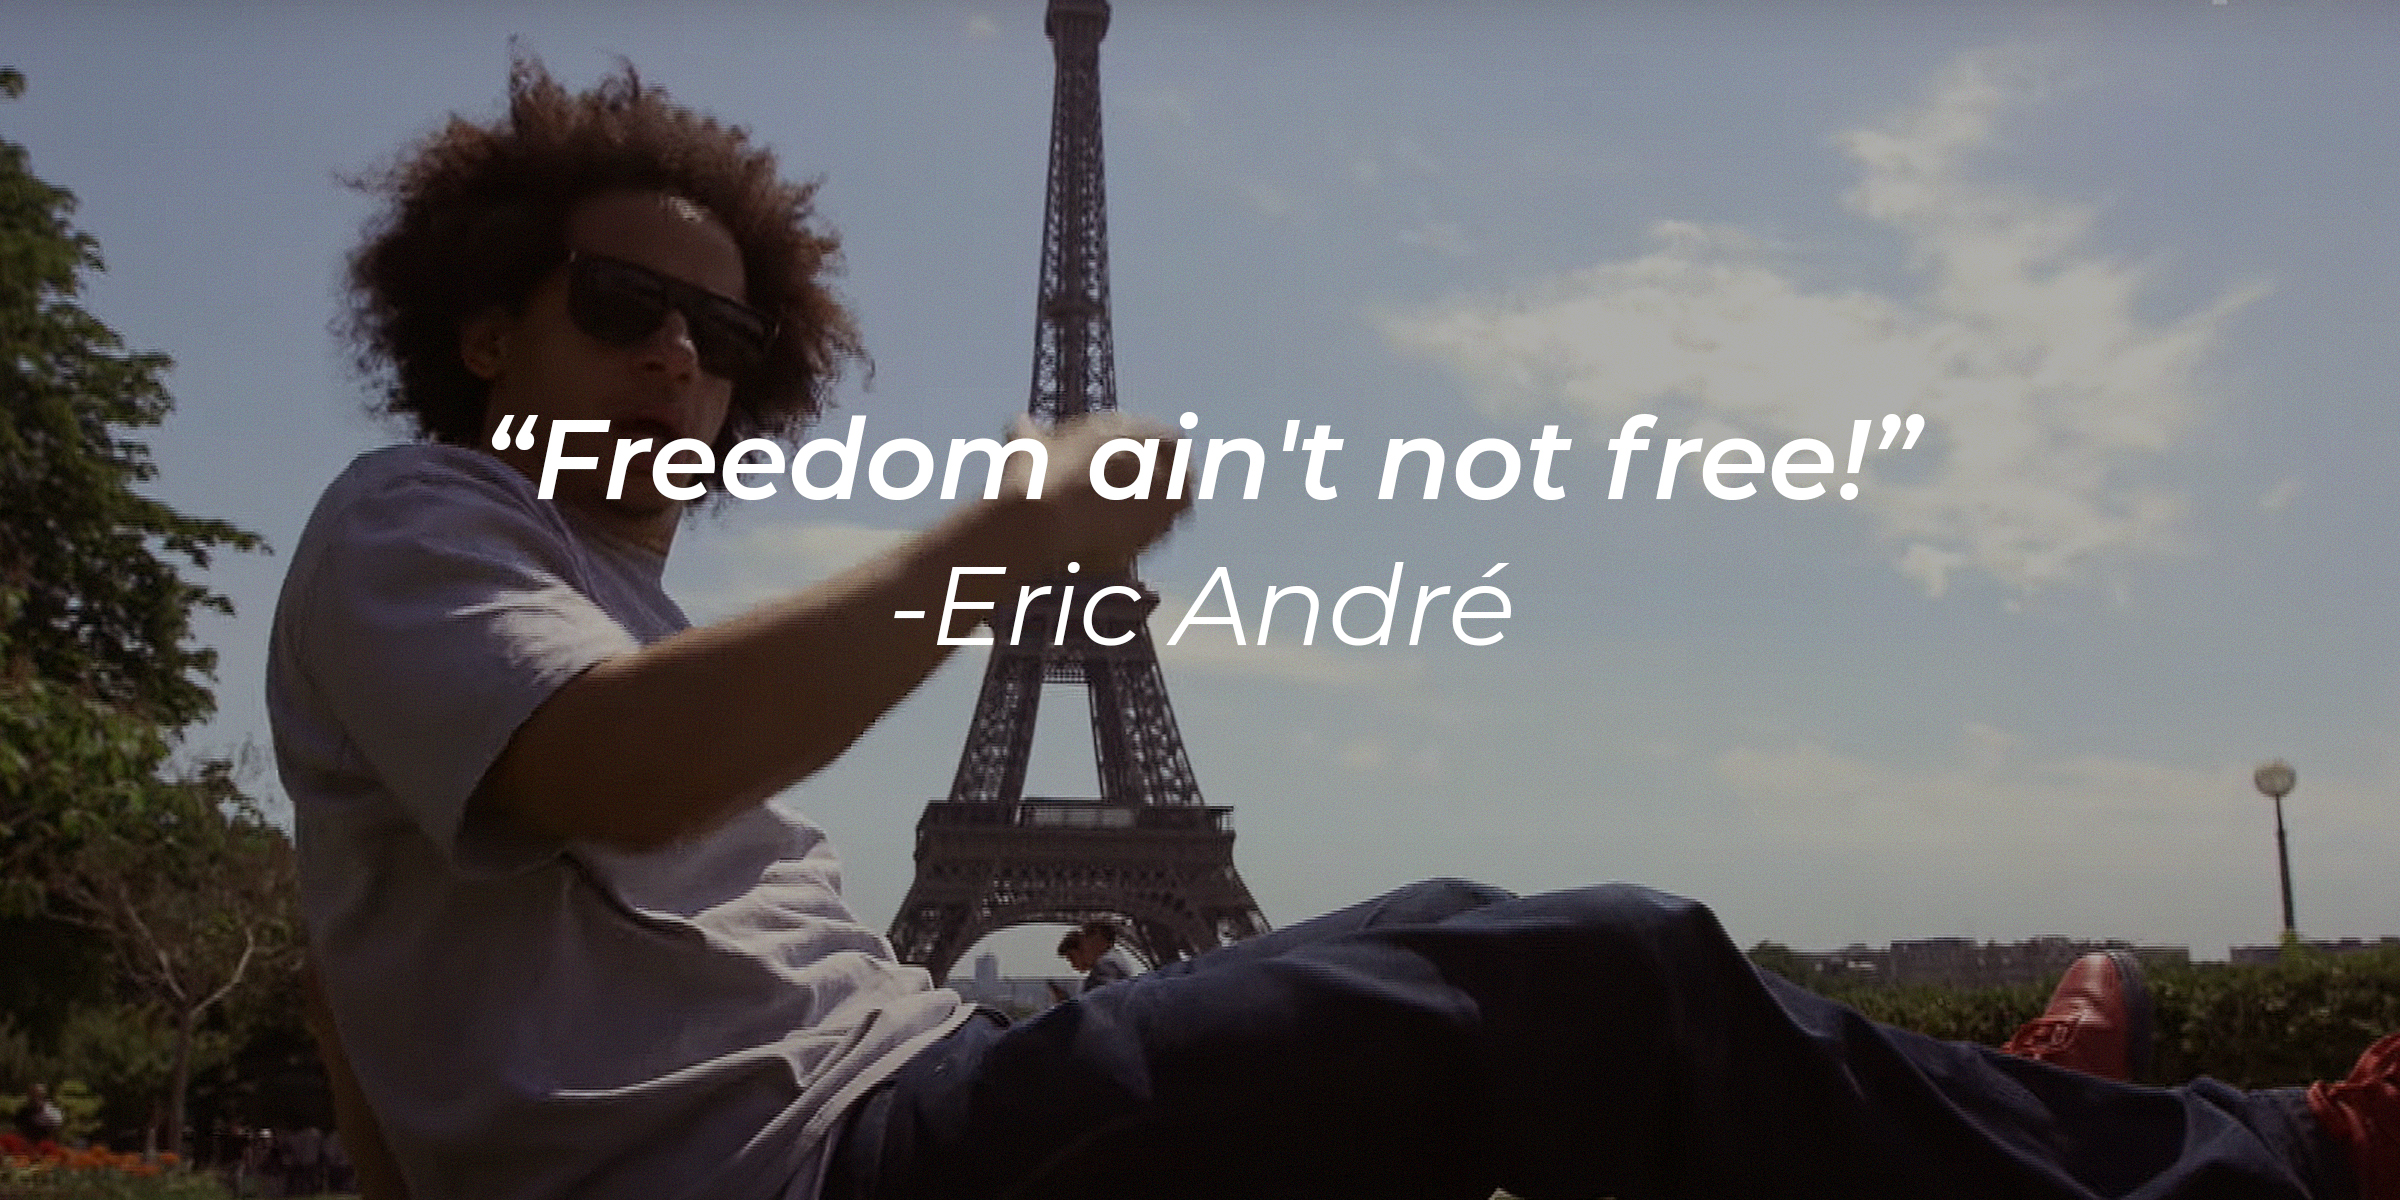 Photo of Eric André with the quote: "Freedom ain't not free!" | Source: Youtube.com/adultswim